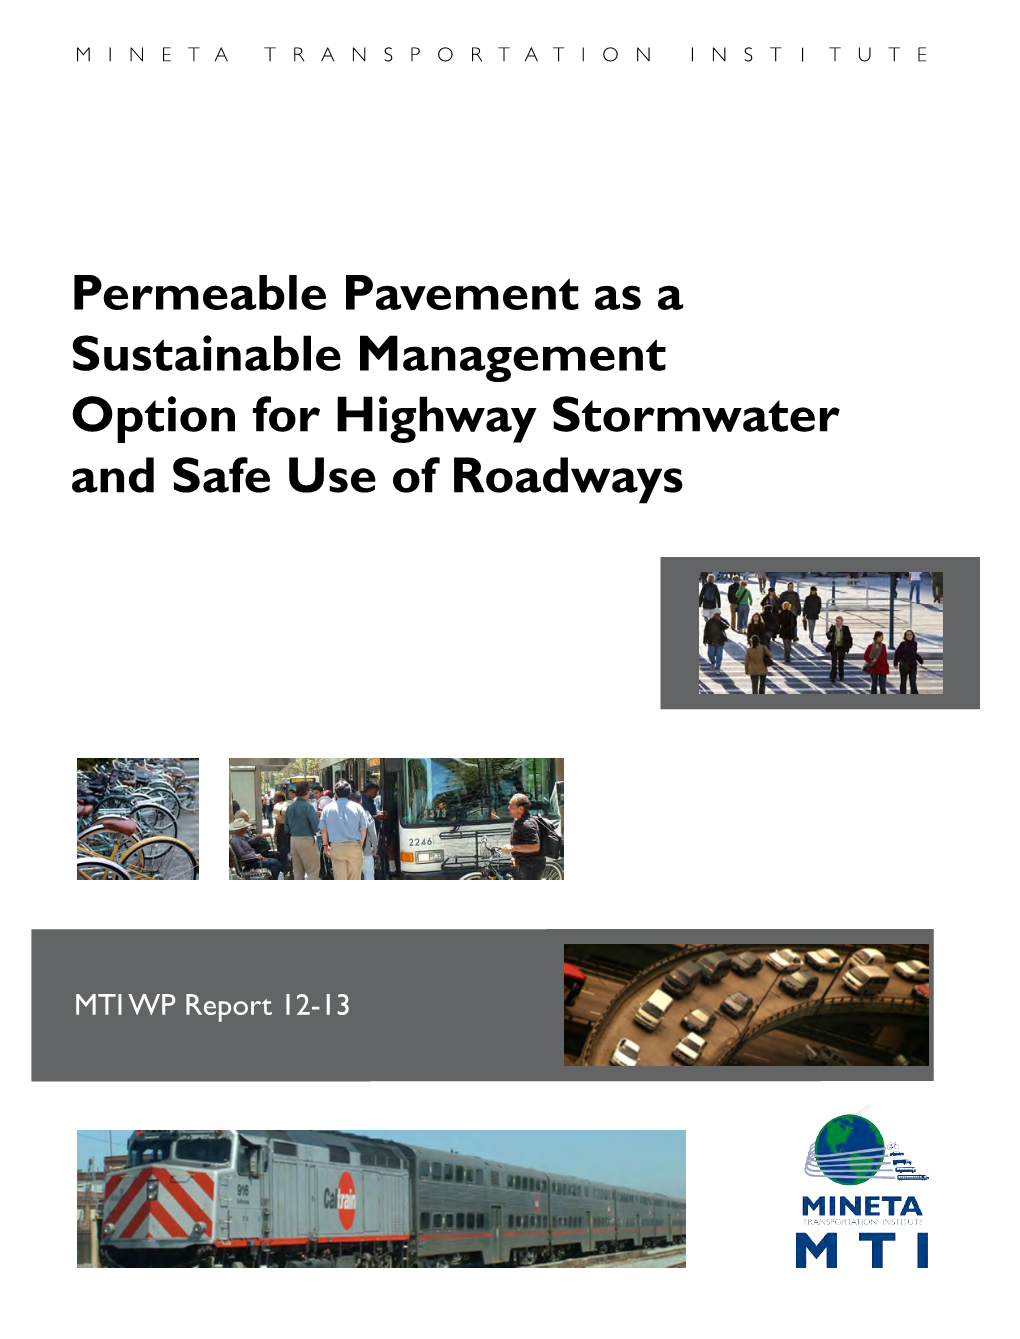 Permeable Pavement As a Sustainable Management Option for Highway Stormwater and Safe Use of Roadways